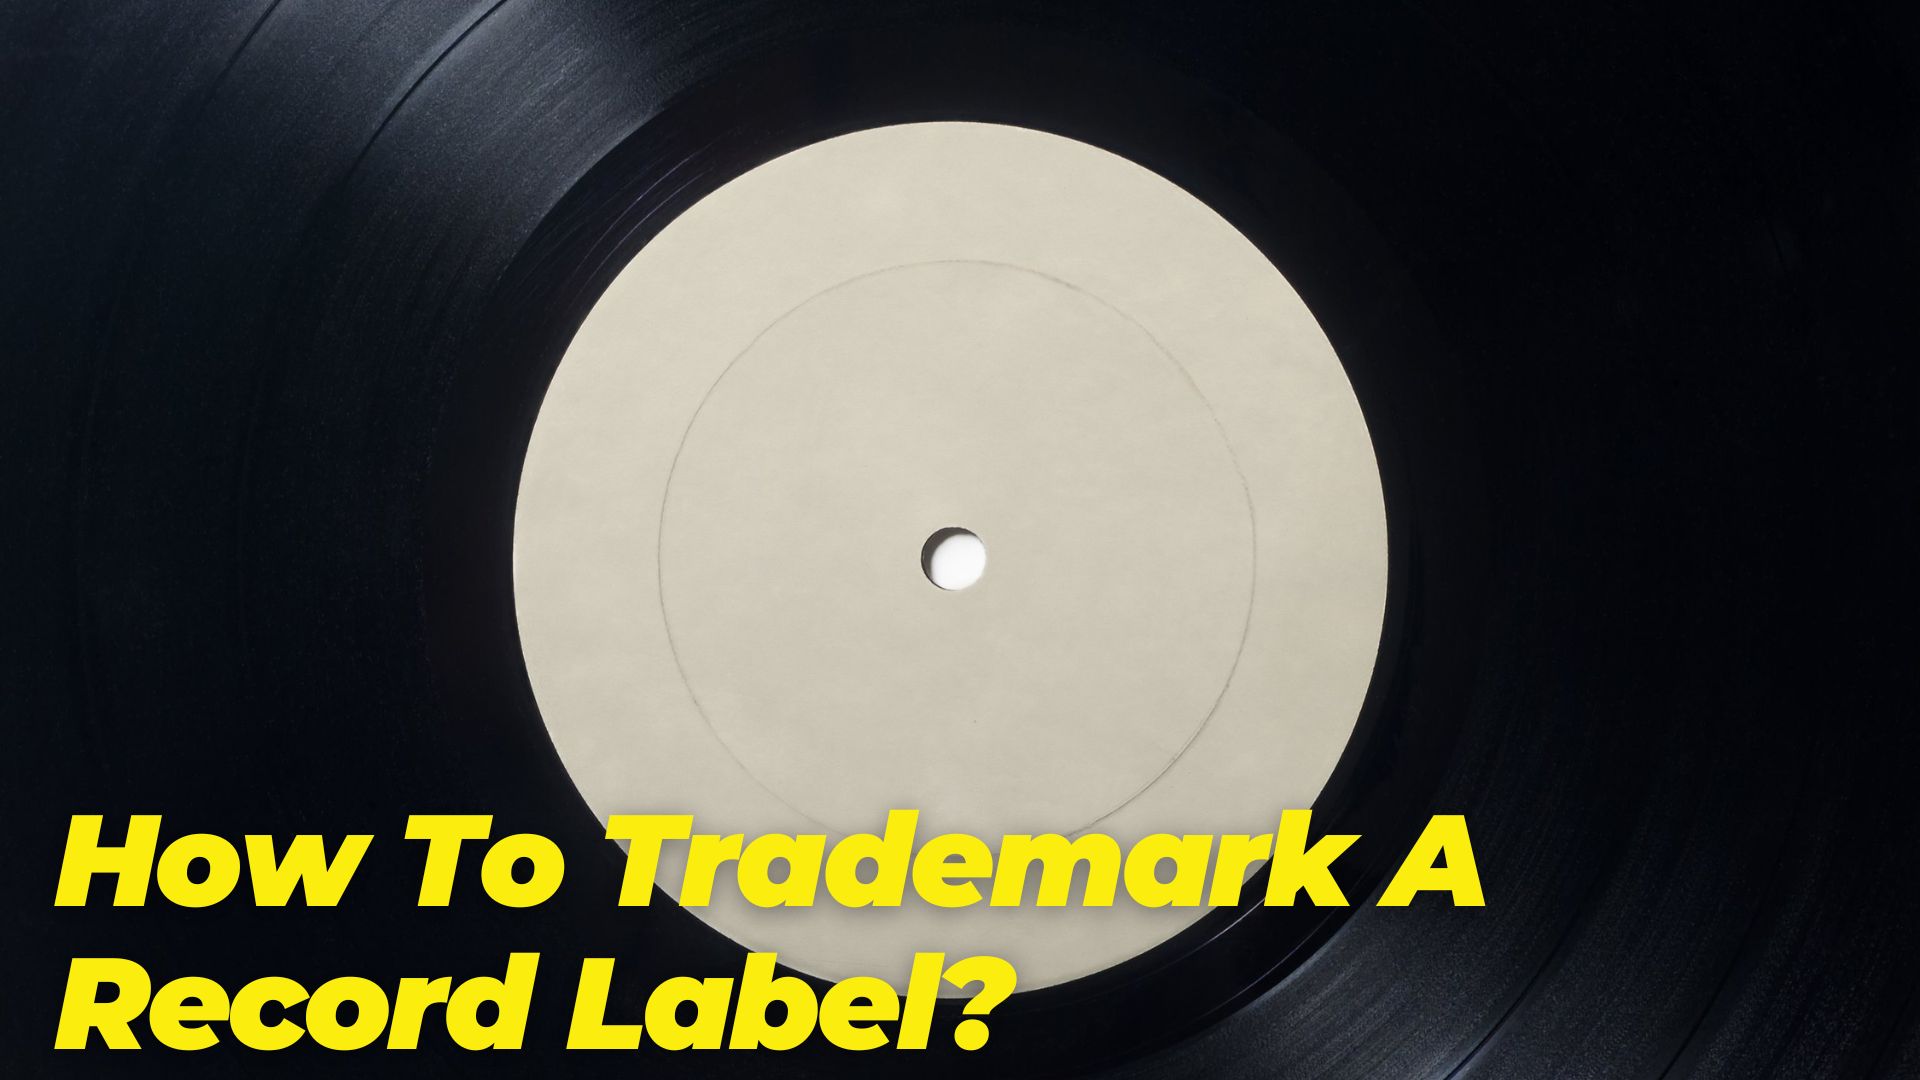 How To Trademark A Record Label?